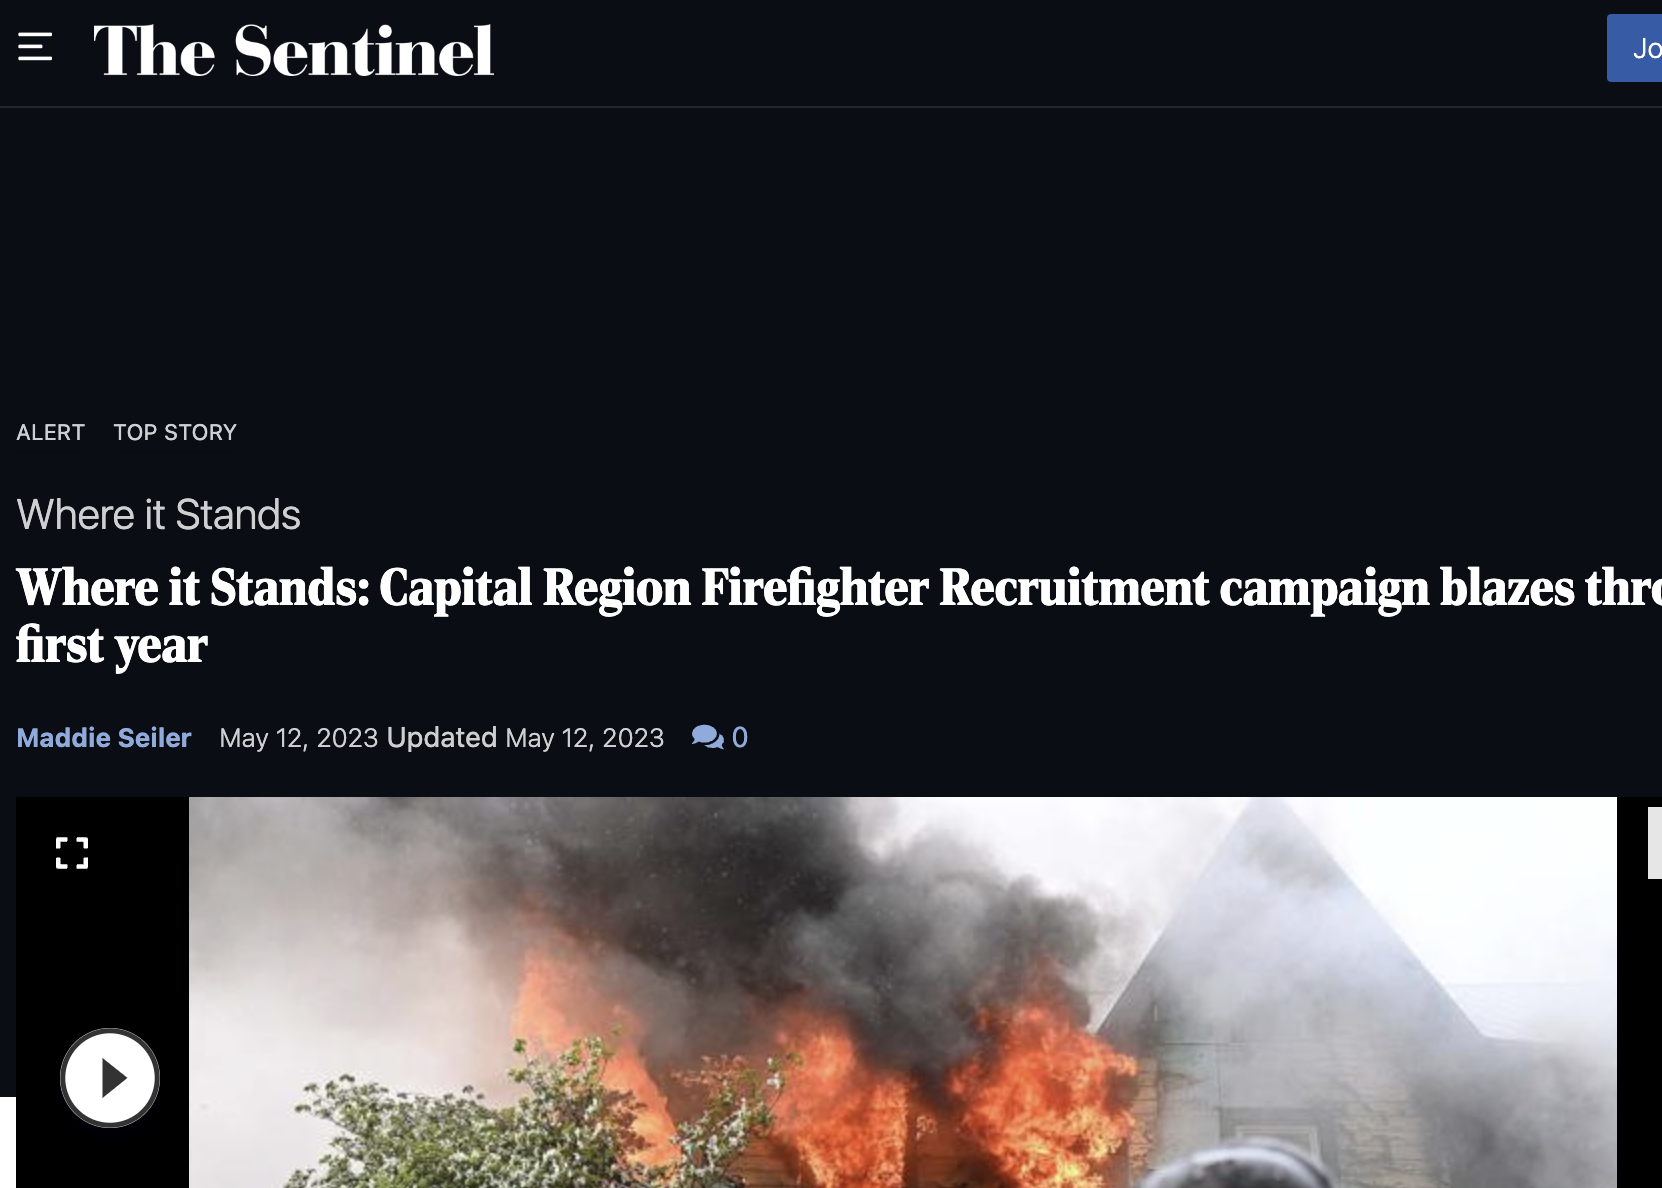 Featured image for “Where it Stands: Capital Region Firefighter Recruitment campaign blazes through first year (via the Sentinel)”